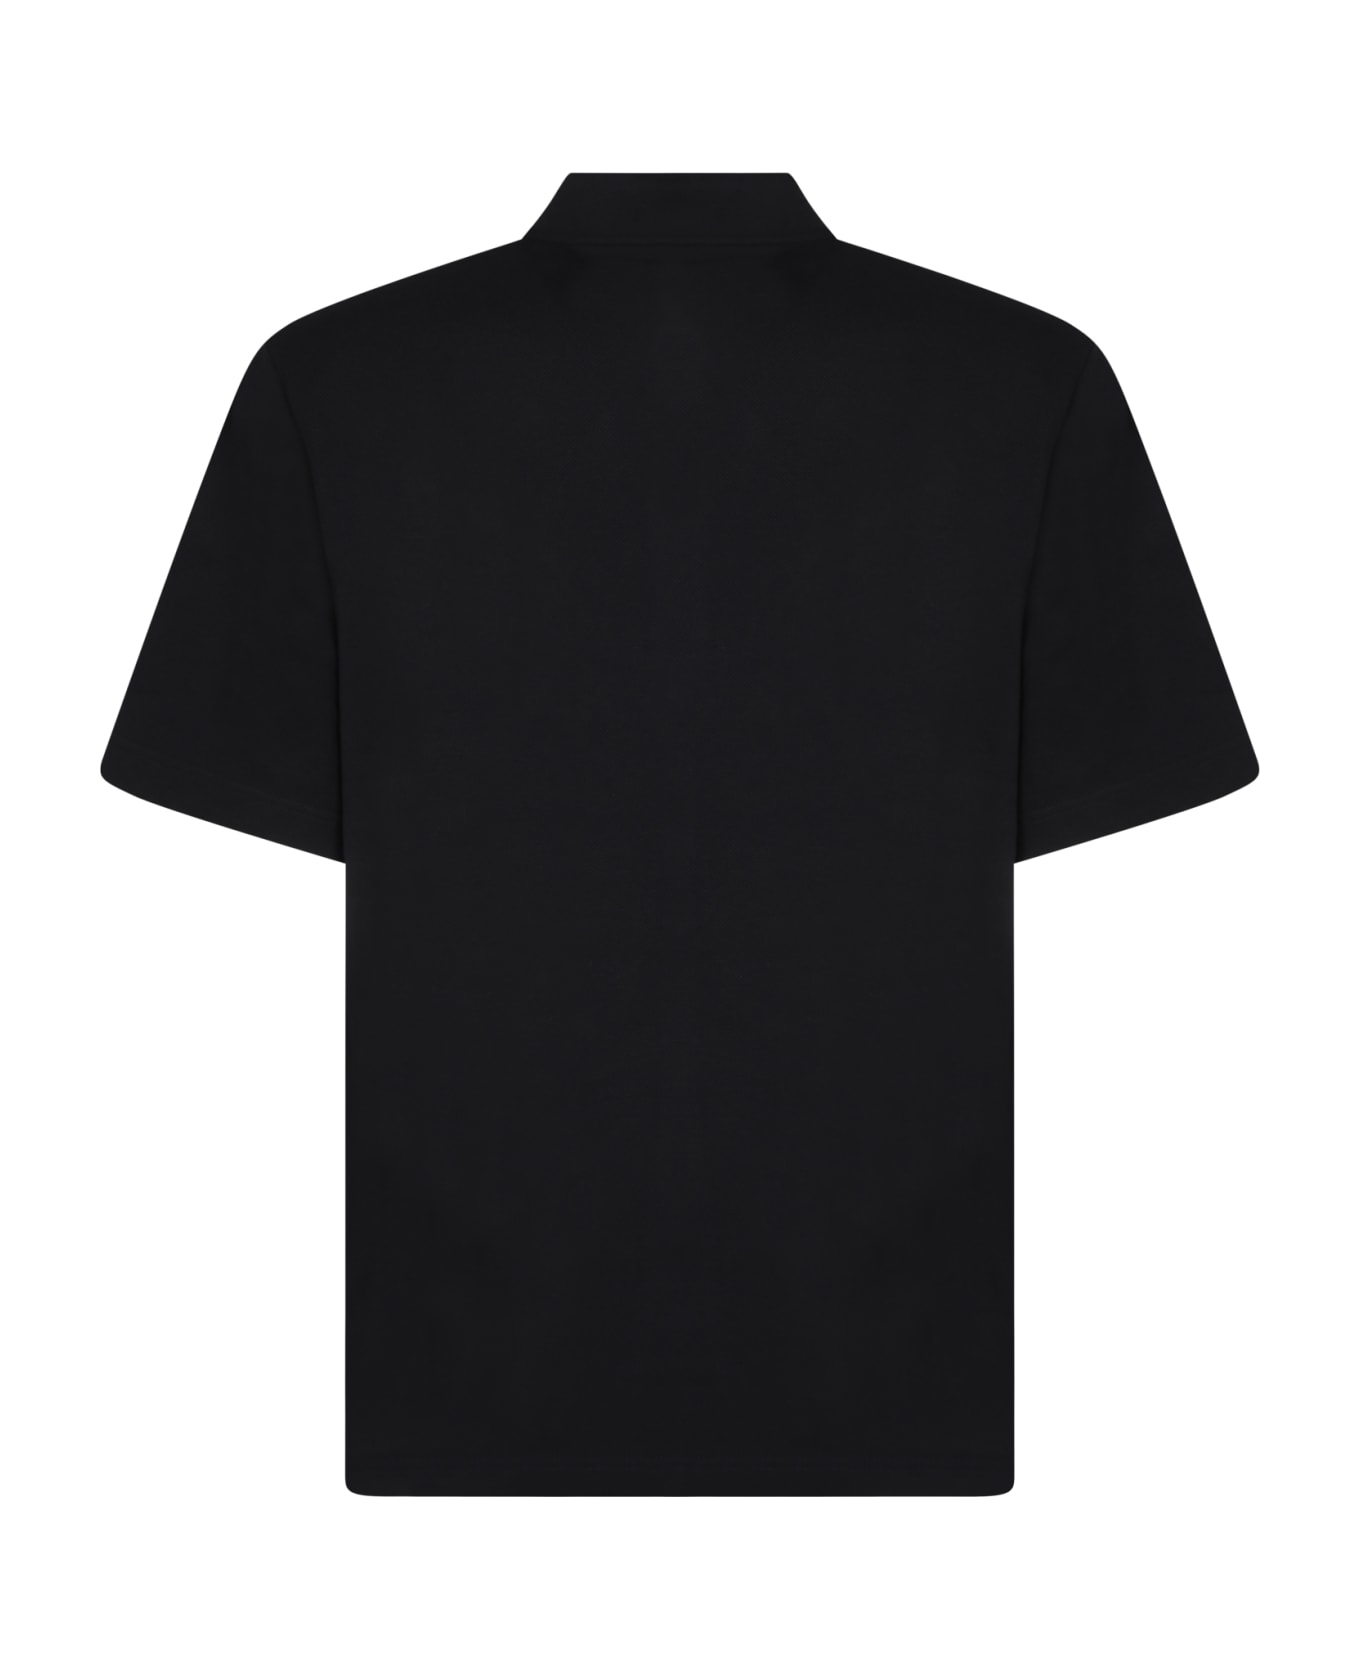 Burberry Logo Embroidered Short Sleeved Polo Shirt - Black